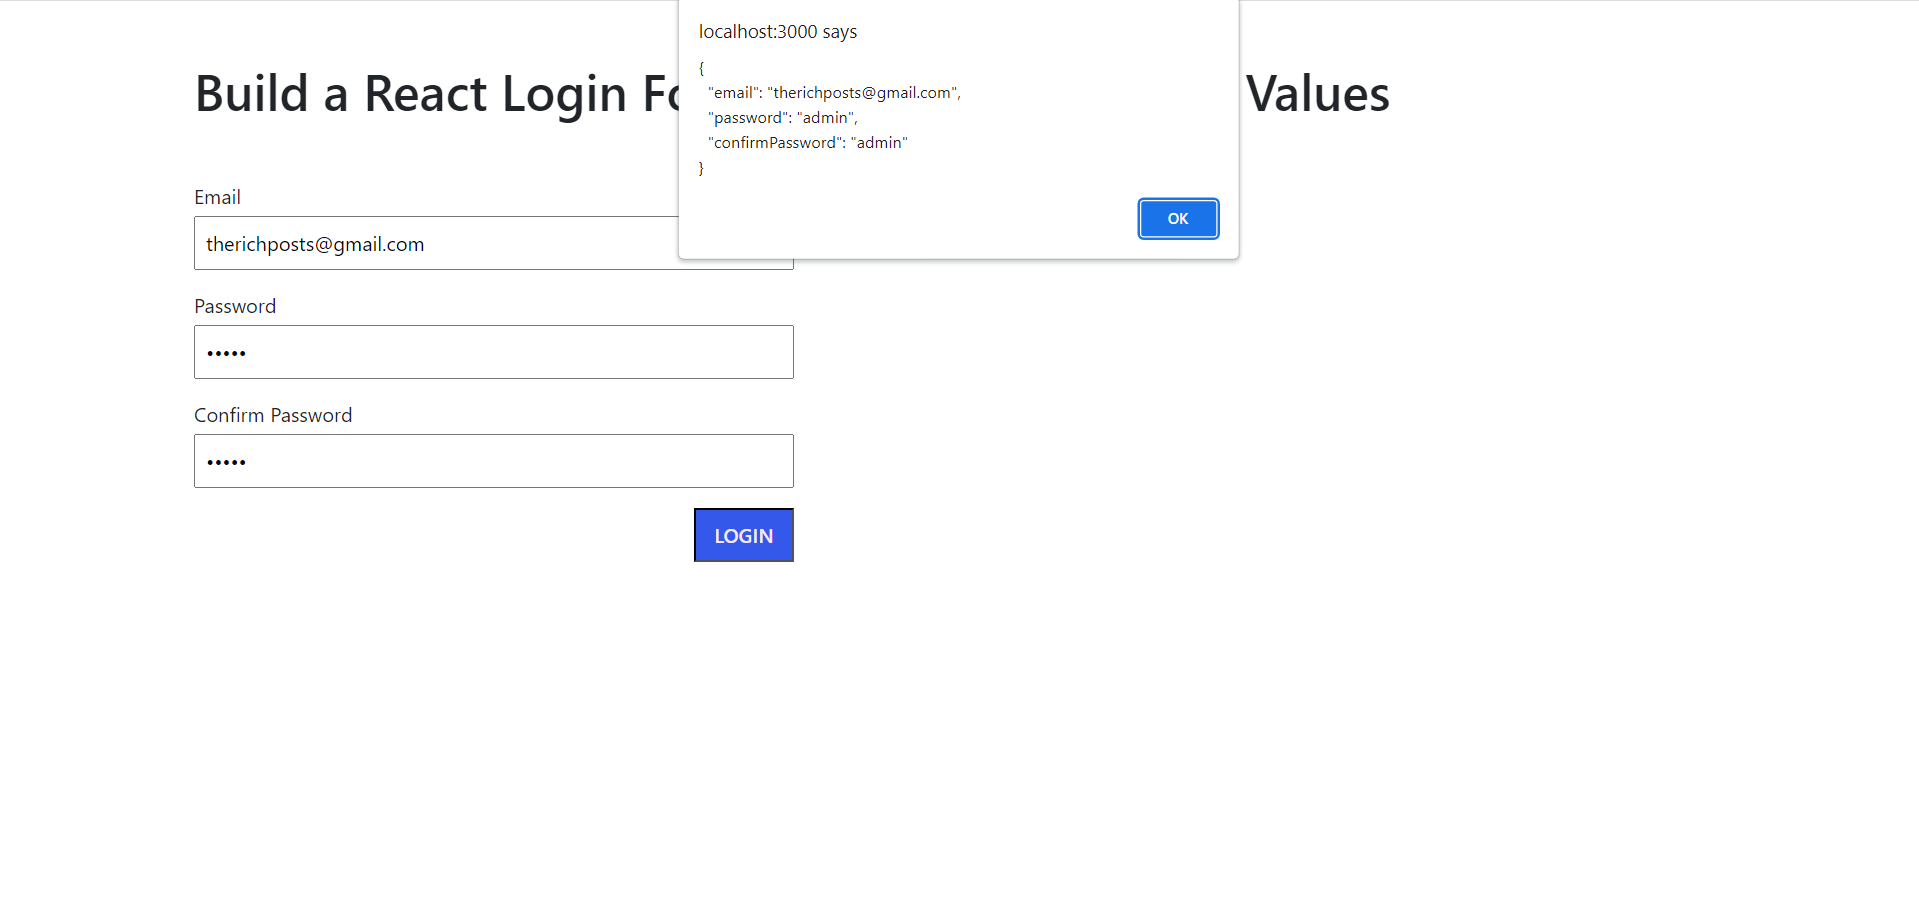 How to Build a React Login Form With Hooks and Get Values?